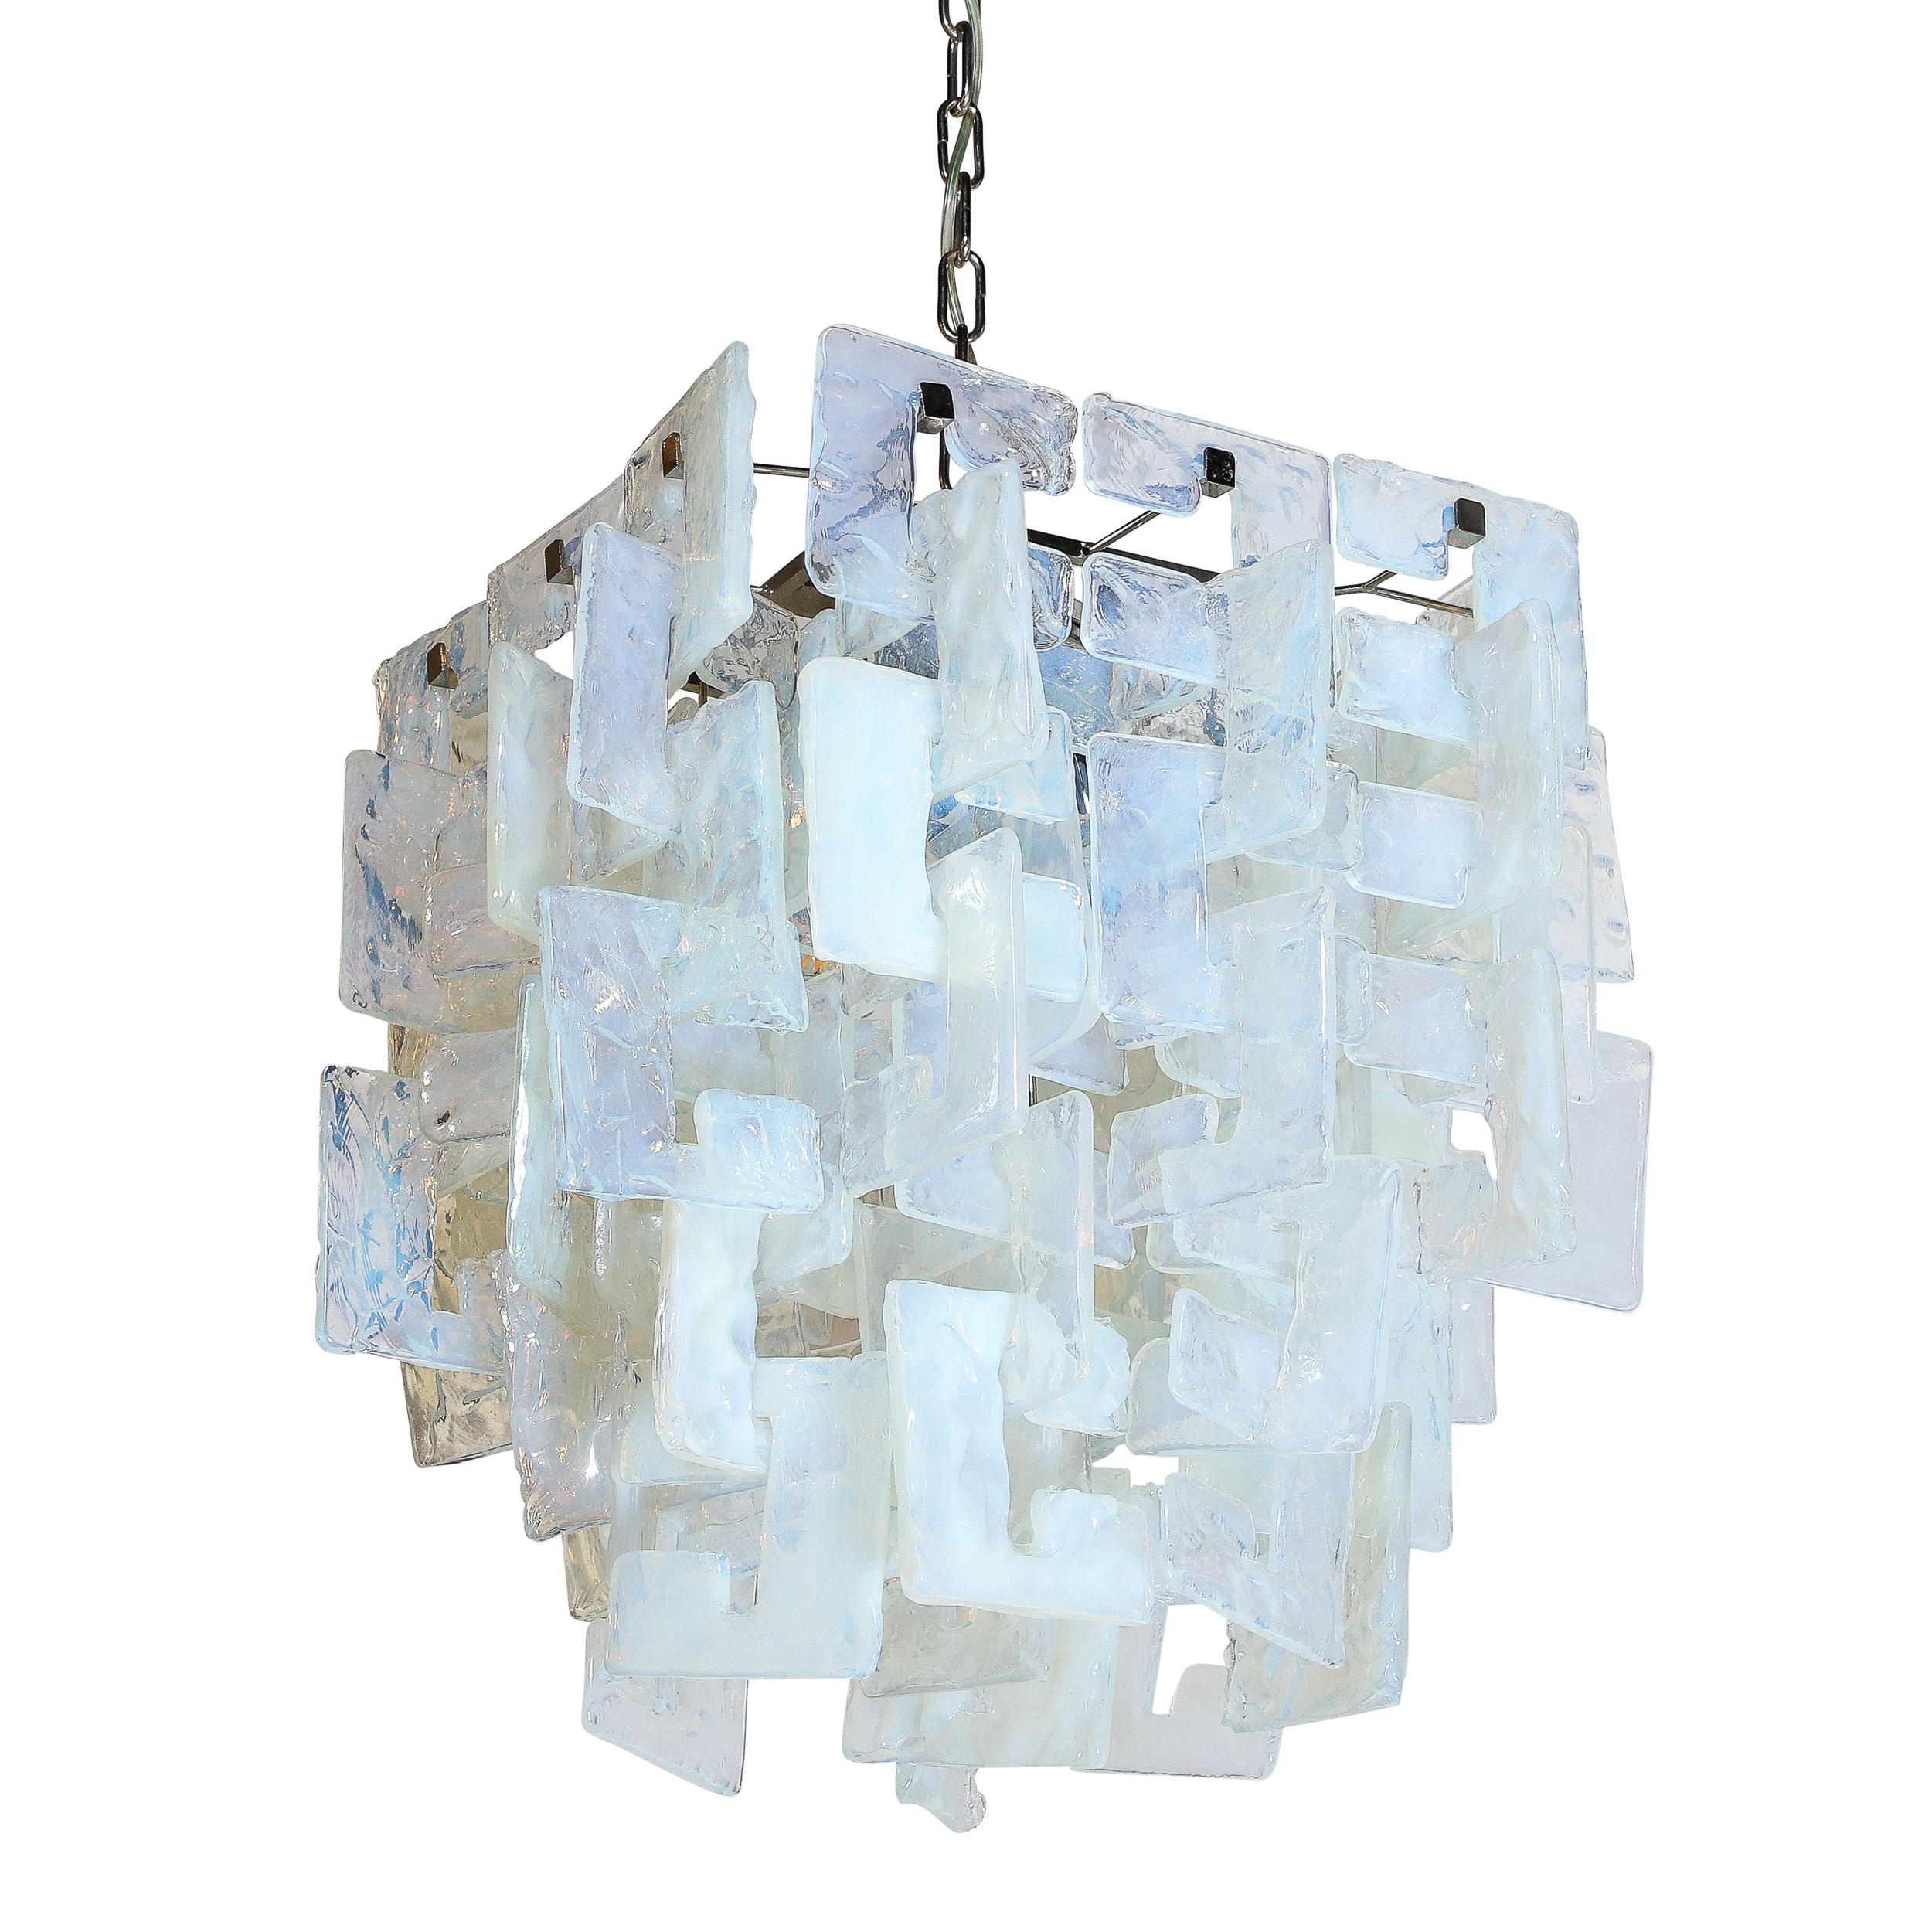 This stunning modernist chandelier was realized in Murano, Italy- the island off the coast of Venice renowned for centuries for its superlative glass production. It features rectangular bodies consisting of an abundance of translucent interlocking